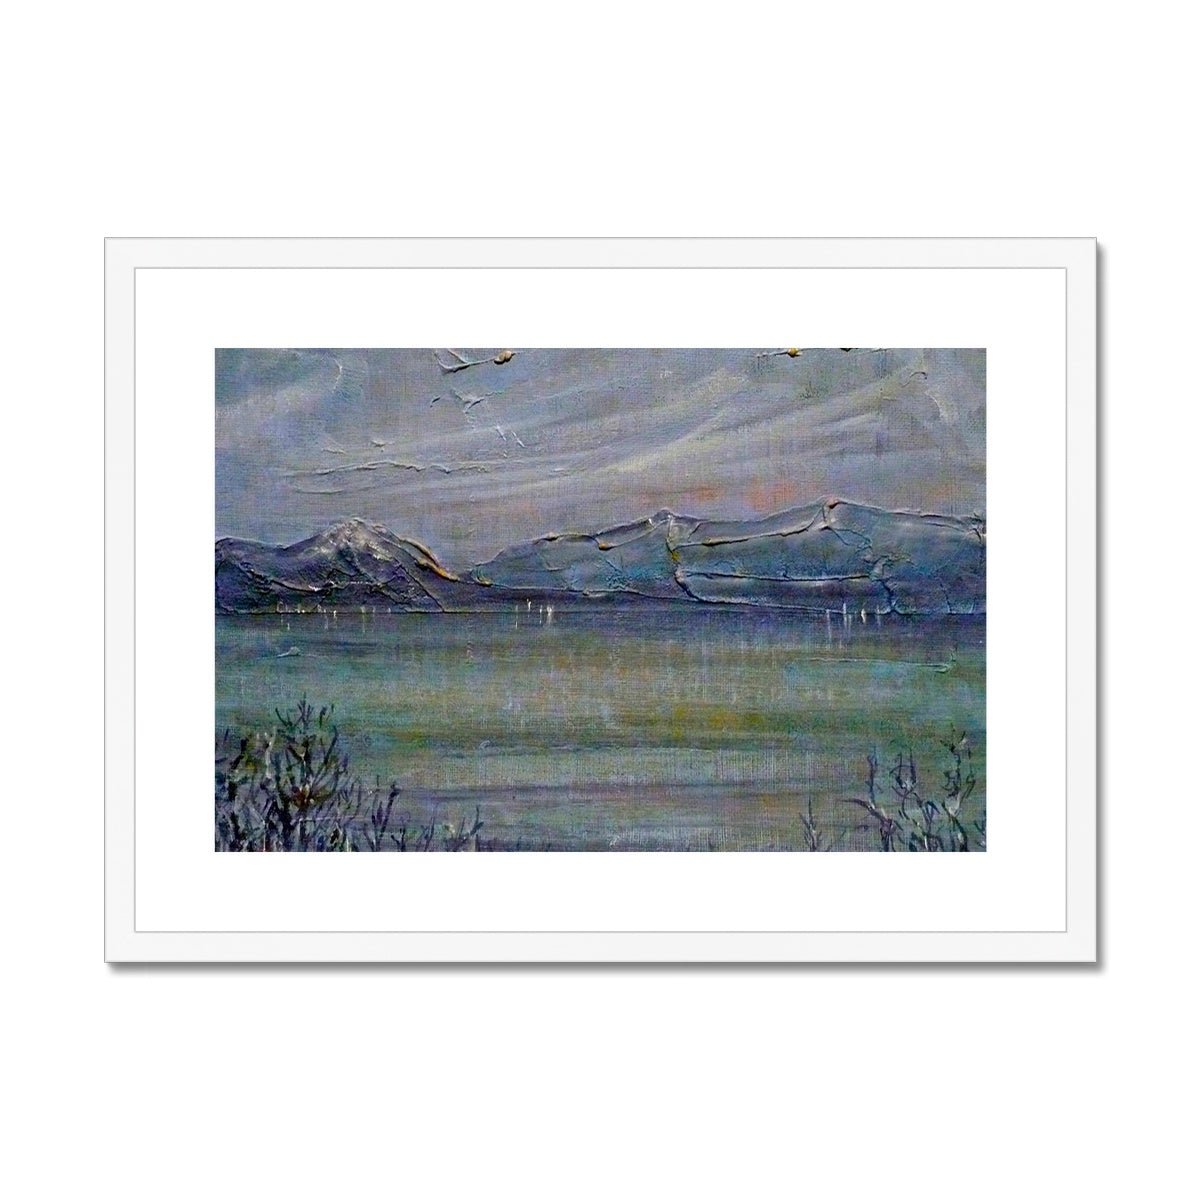 Loch Morlich Moonlight Painting | Framed & Mounted Prints From Scotland-Framed & Mounted Prints-Scottish Lochs & Mountains Art Gallery-A2 Landscape-White Frame-Paintings, Prints, Homeware, Art Gifts From Scotland By Scottish Artist Kevin Hunter